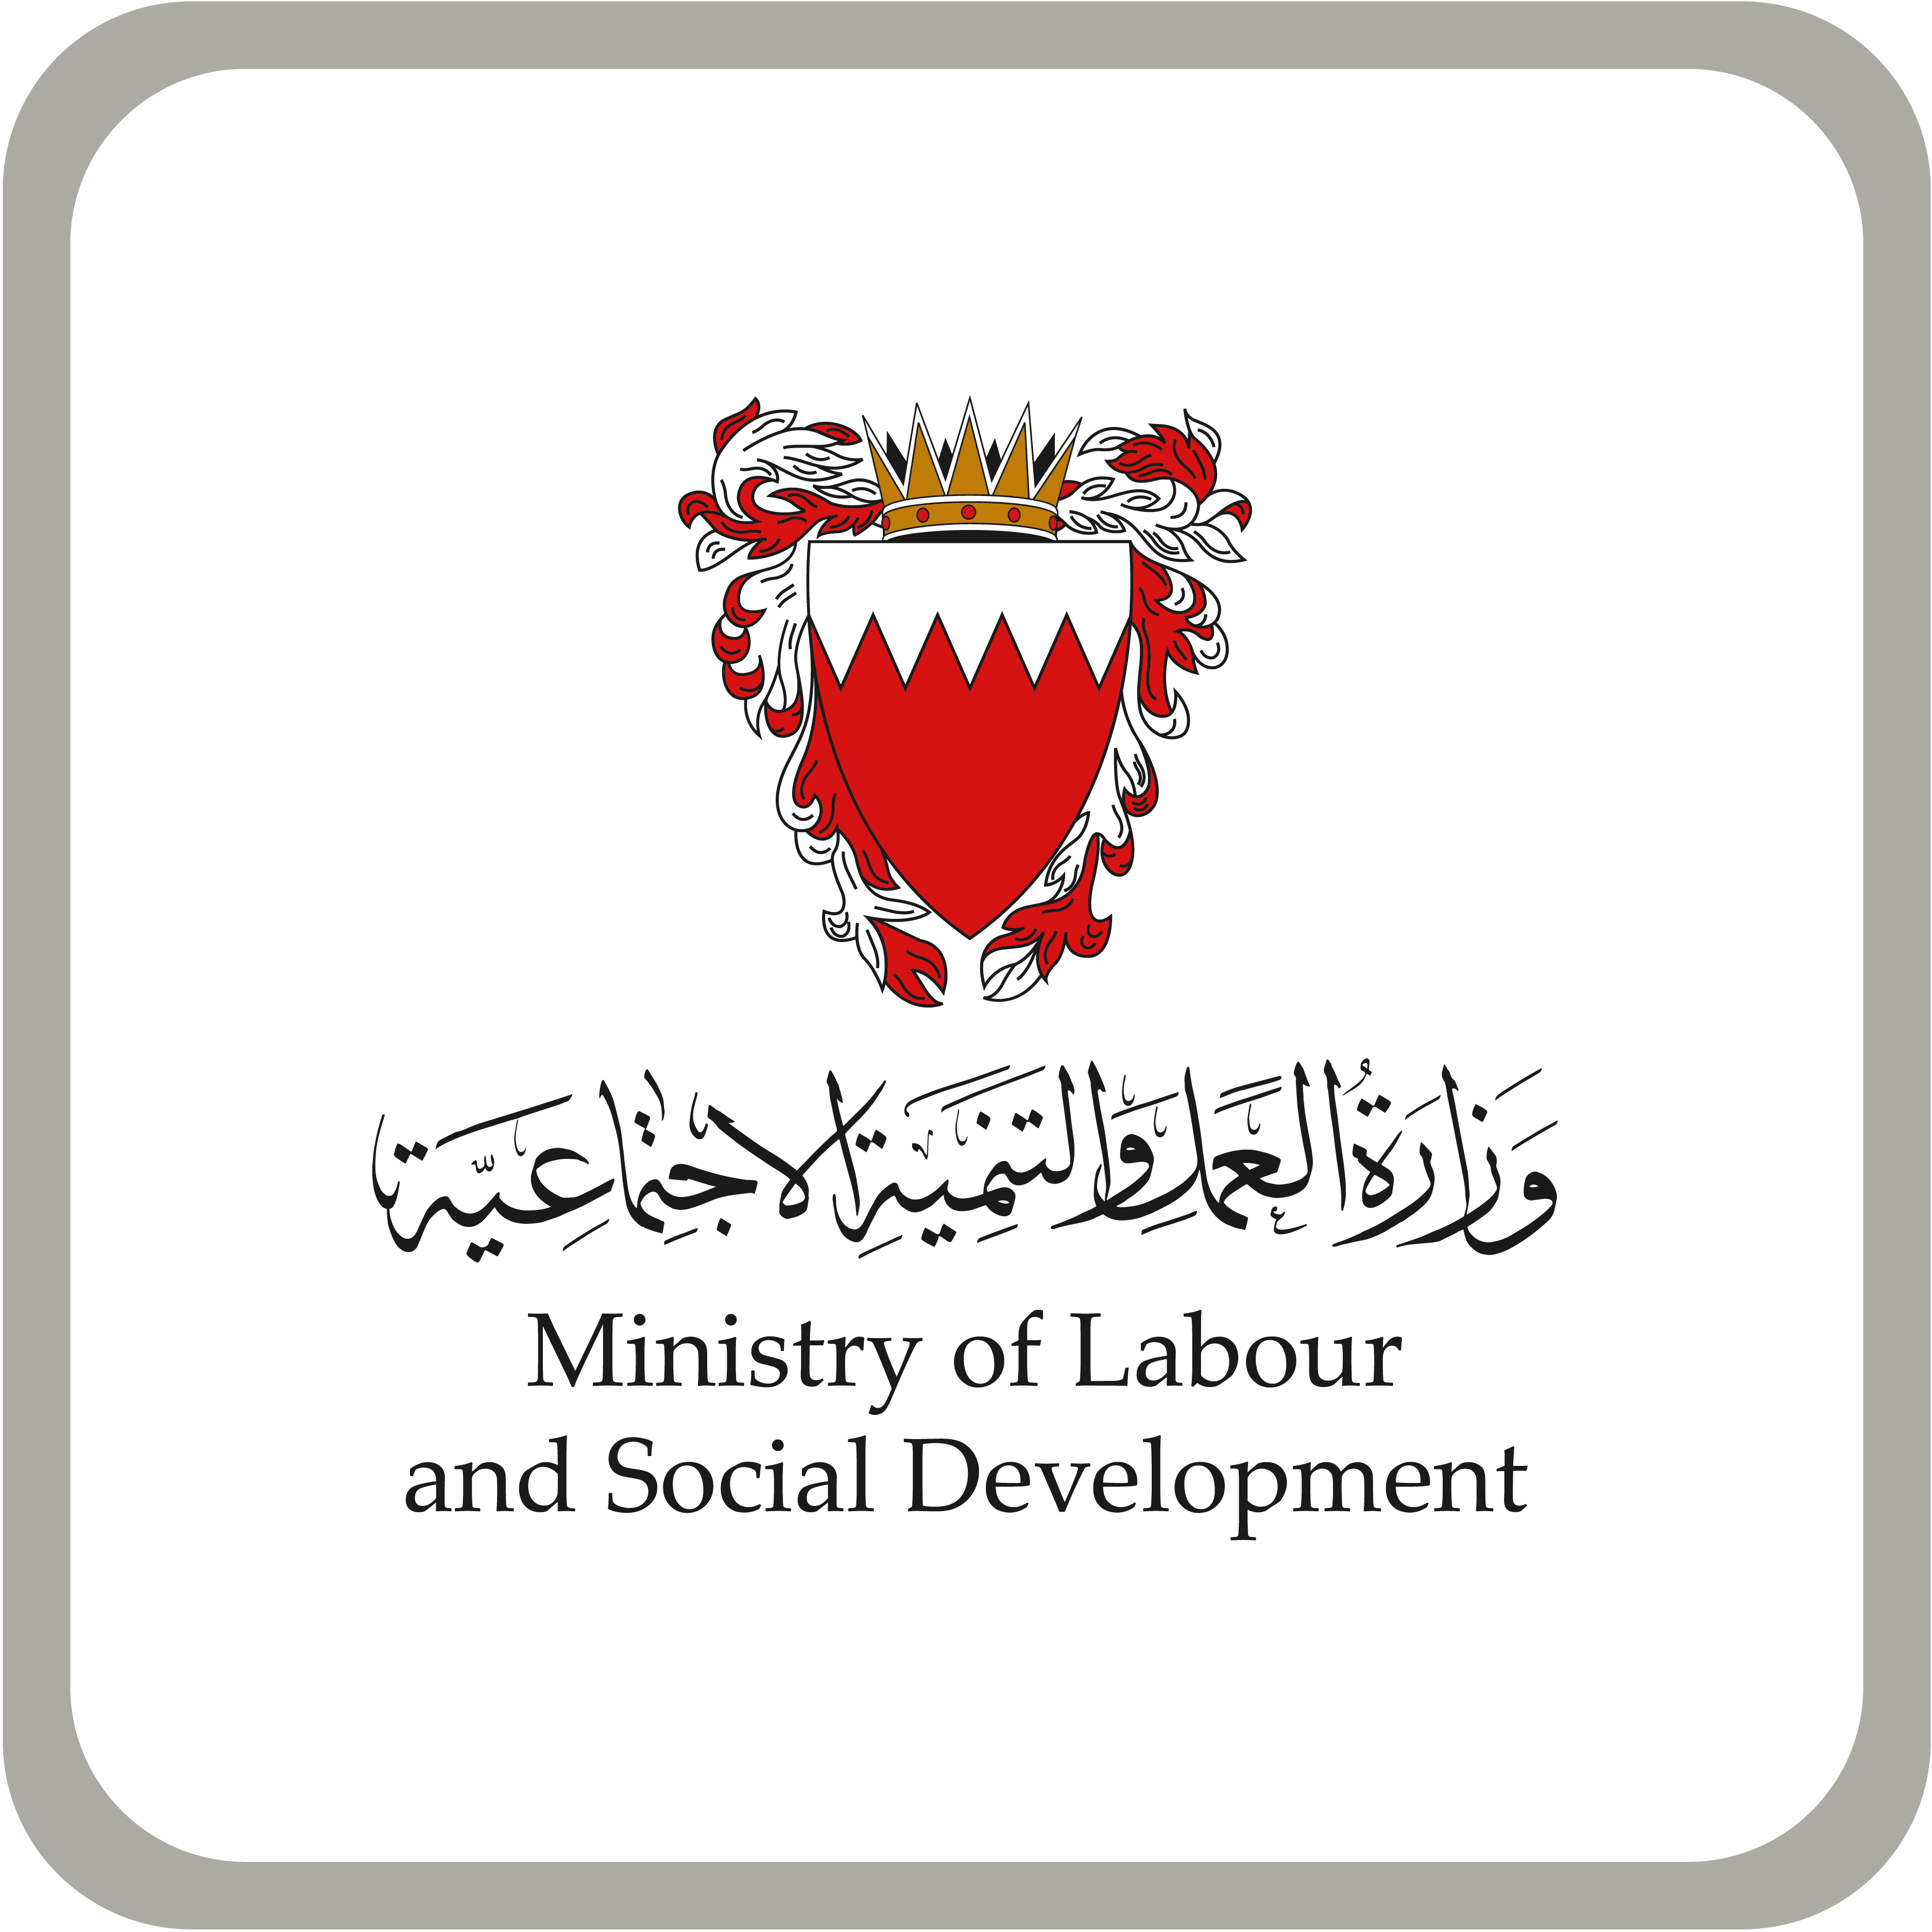 Ministry of Labour and Social Development